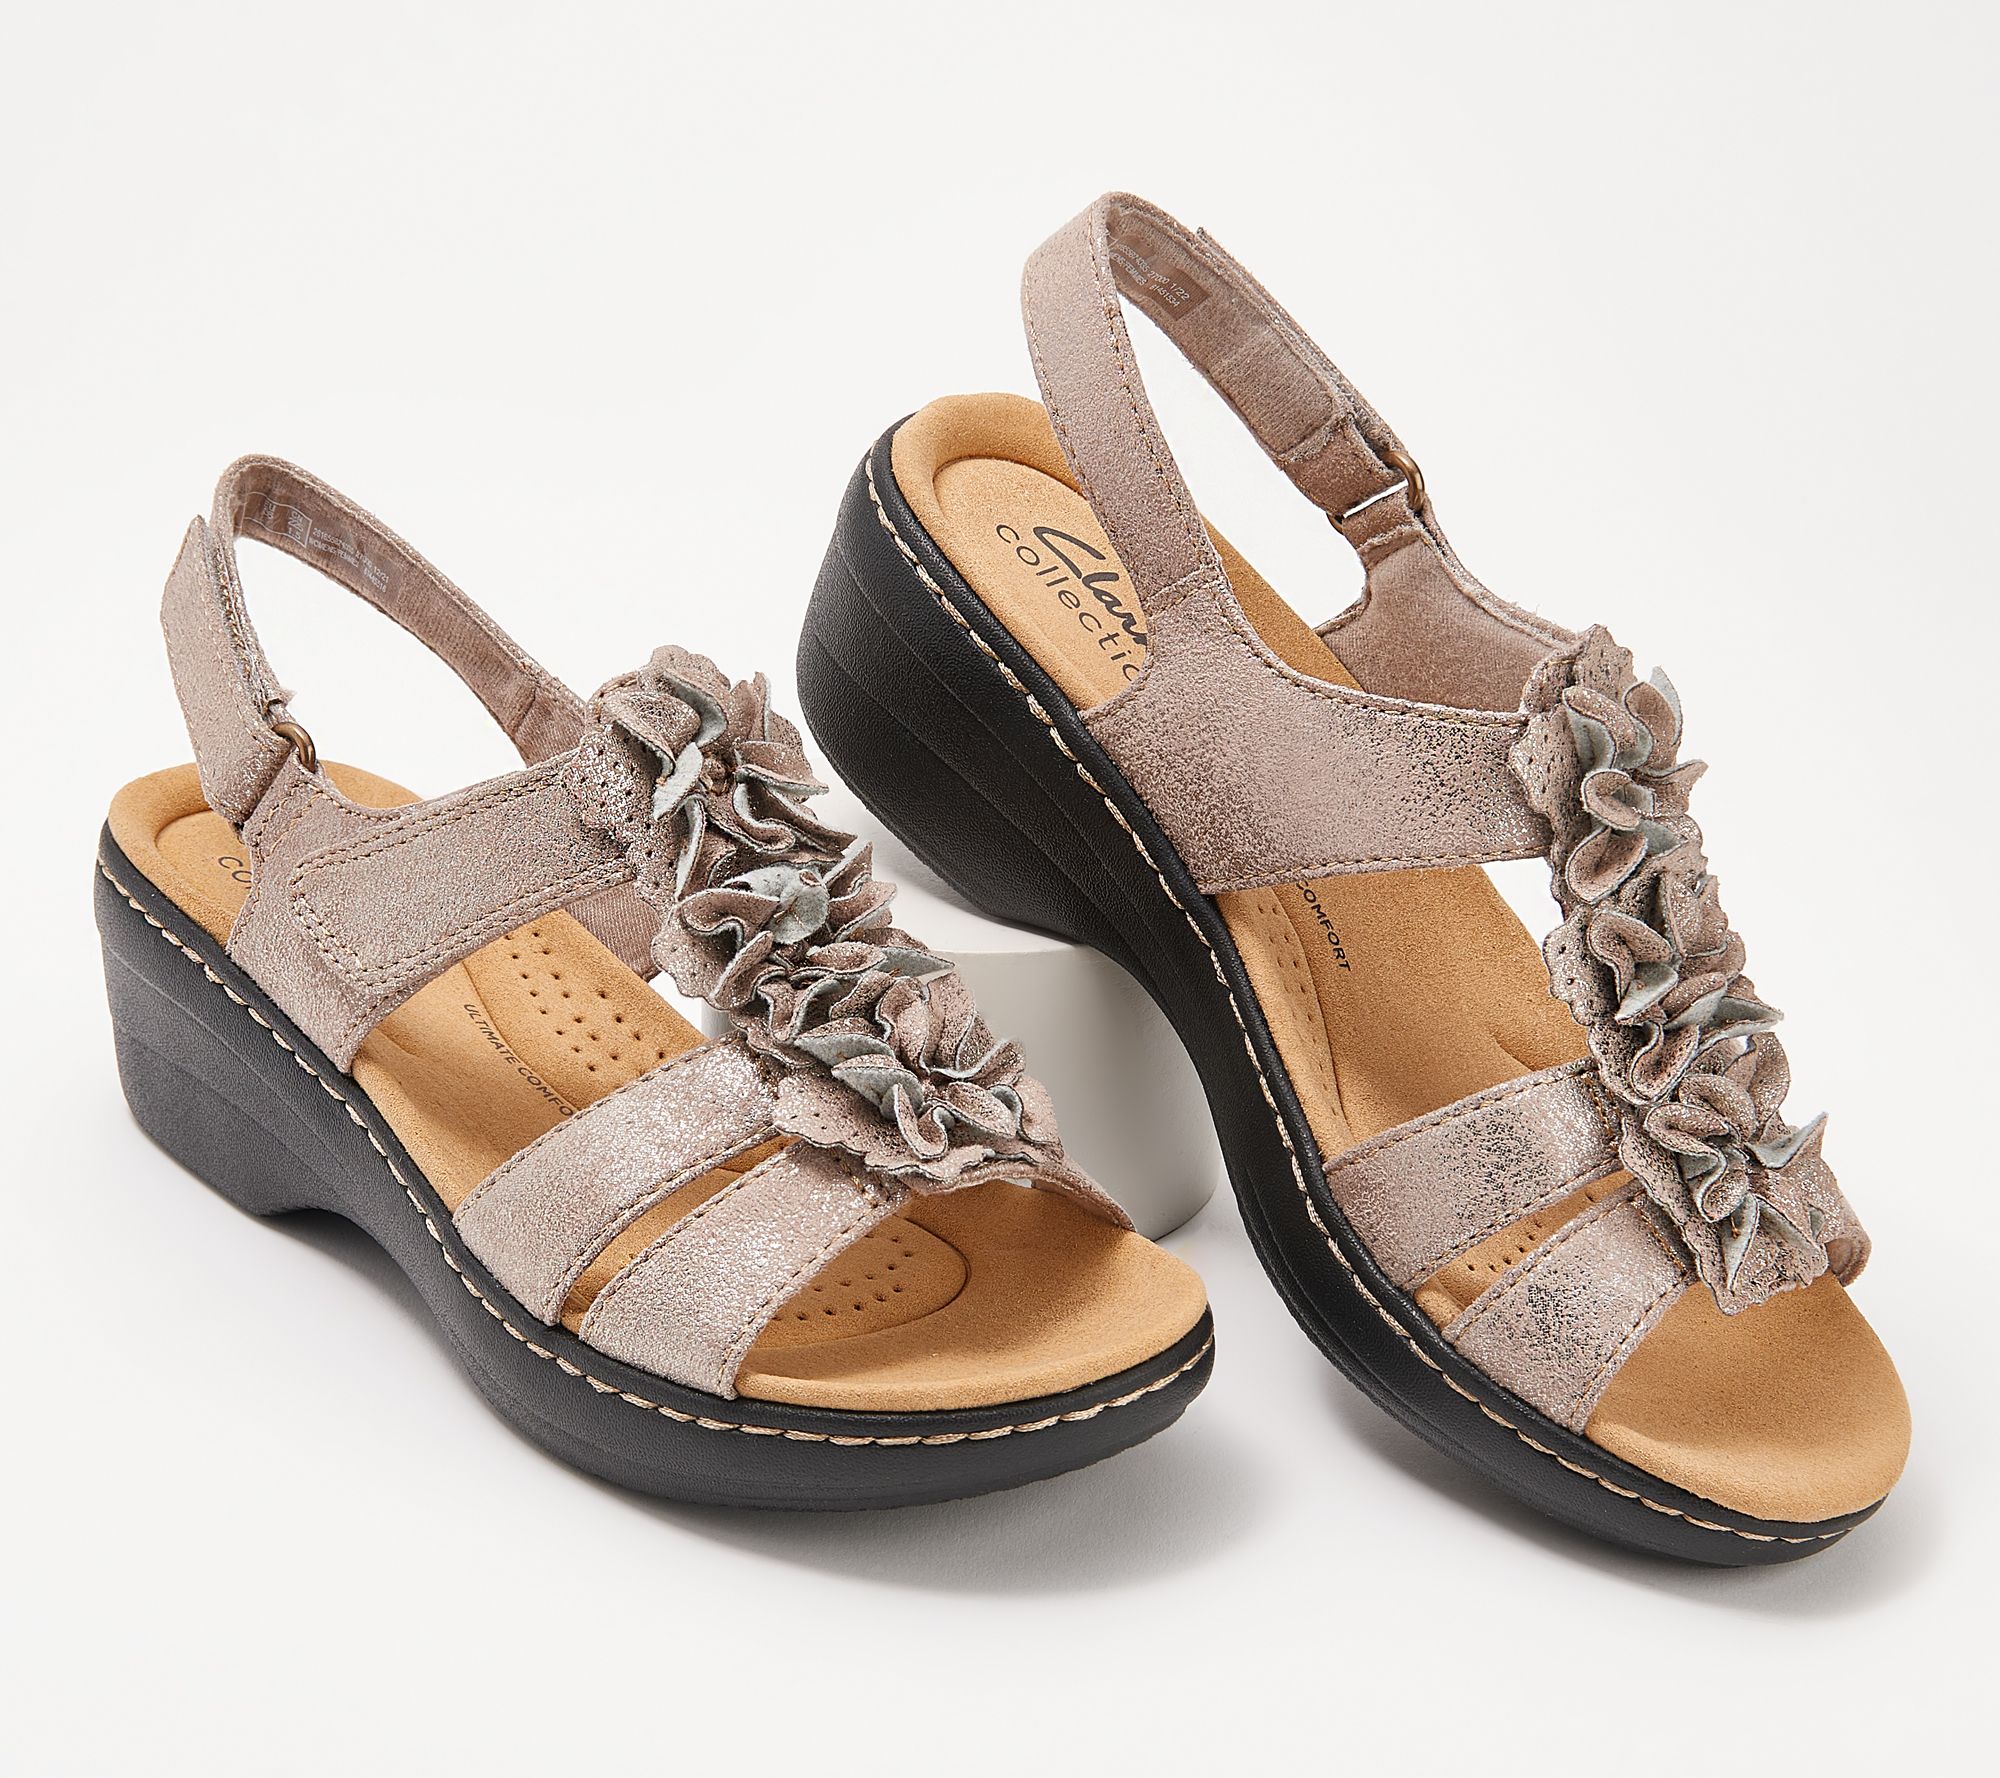 Clarks Collection Floral Wedge Sandals -Merliah Sheryl - QVC.com